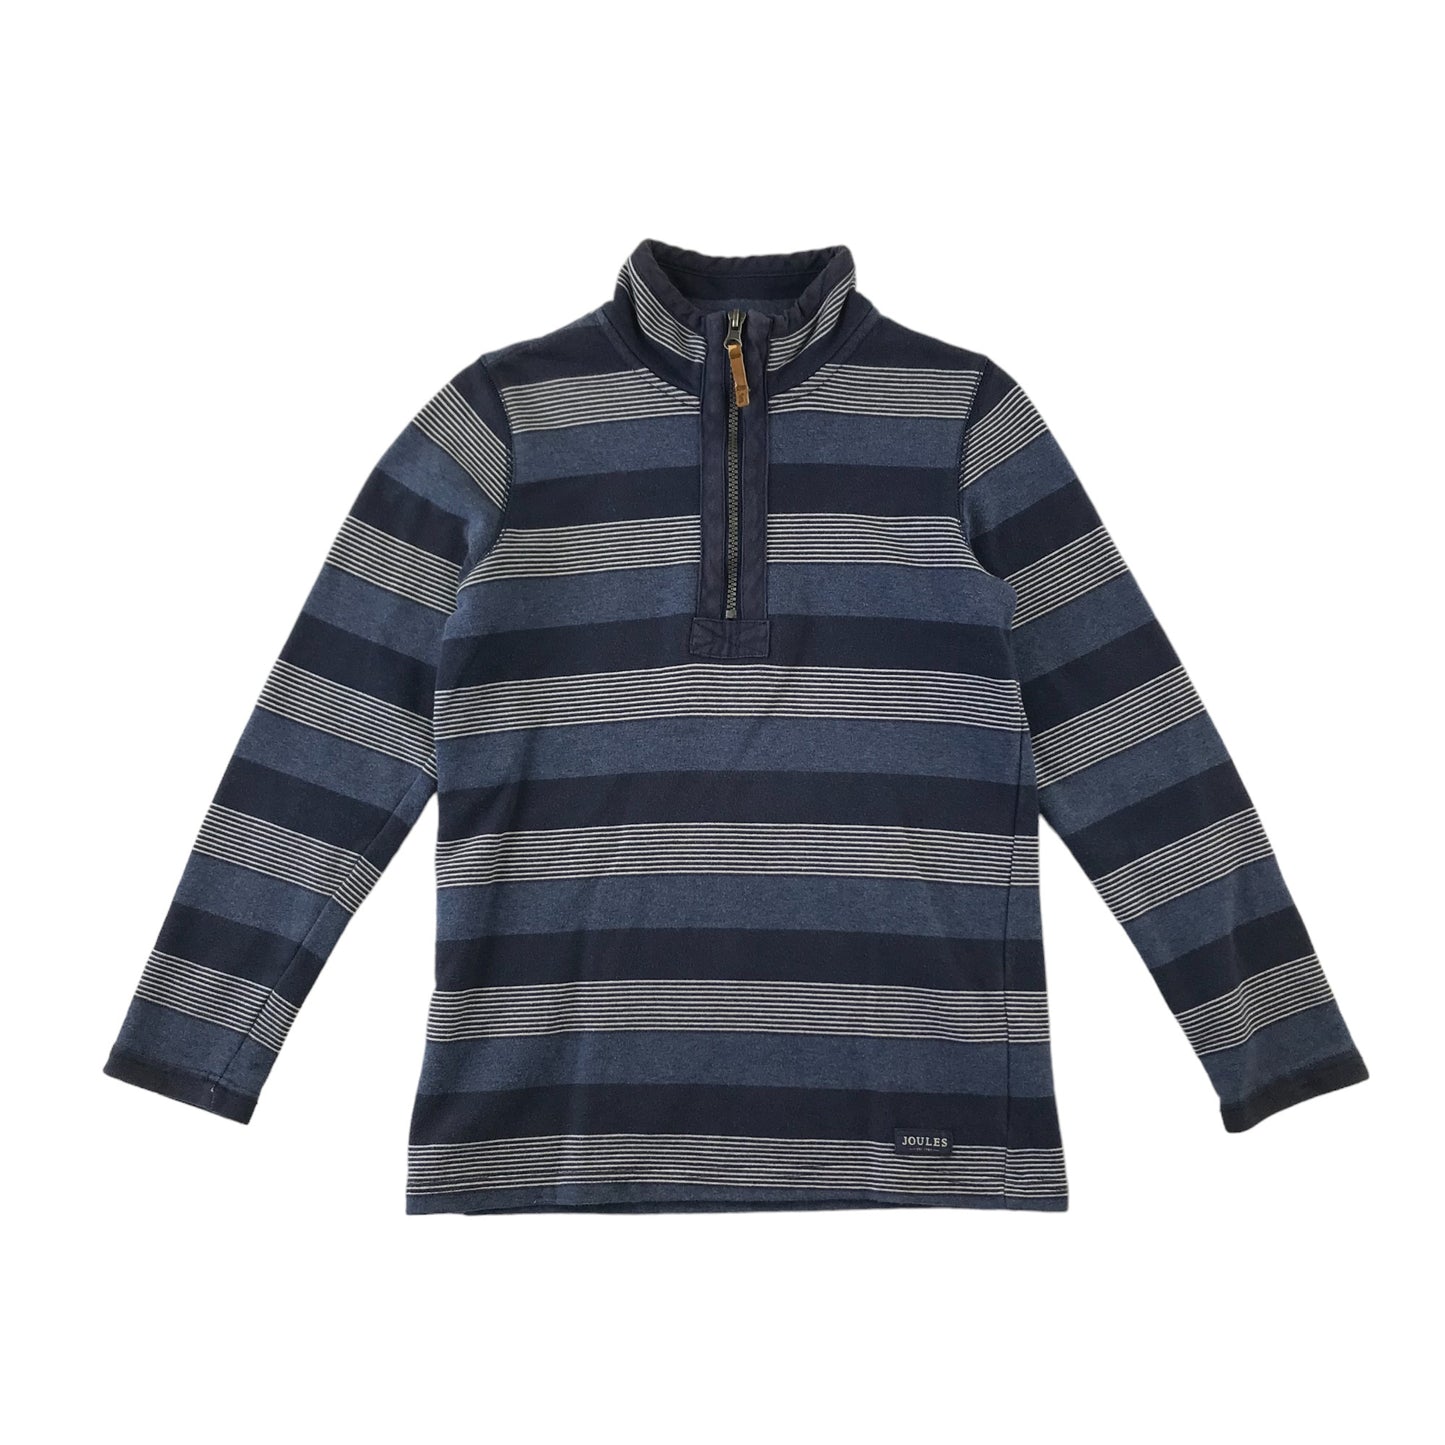 Joules sweater 9-10 years blue and grey stripy horizontal stripes jersey cotton